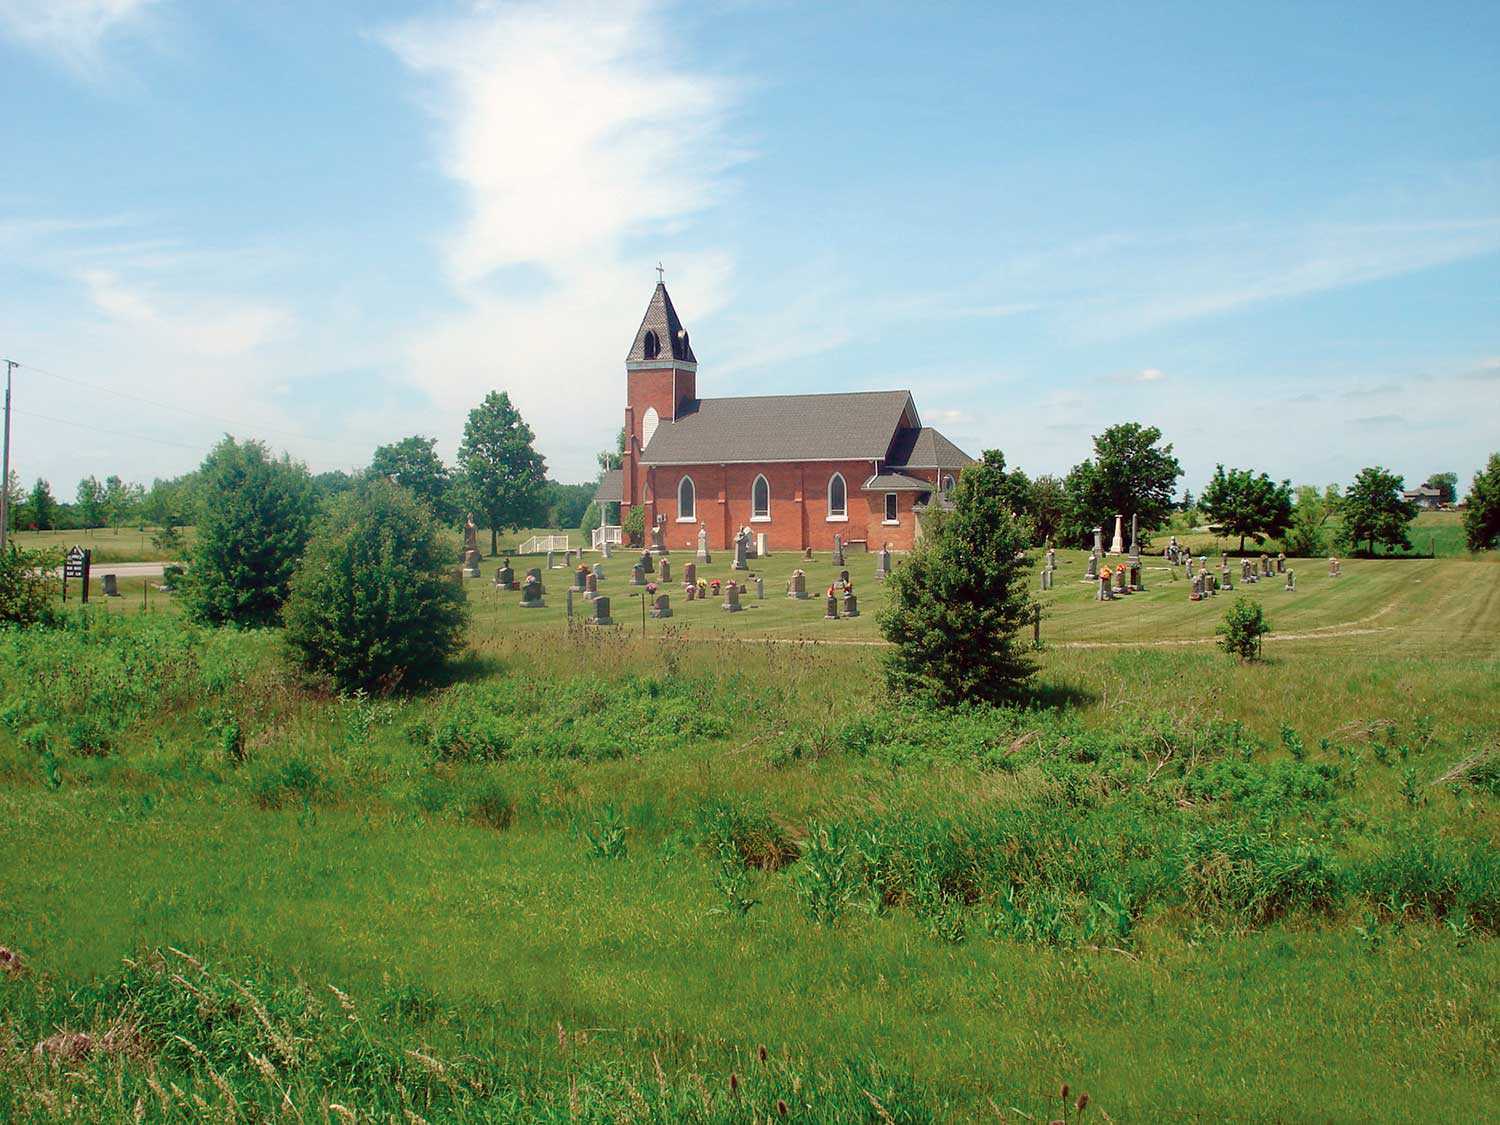 With its associated cemetery and rural landscape, St. Anne’s Roman Catholic Church is a Haldimand landmark